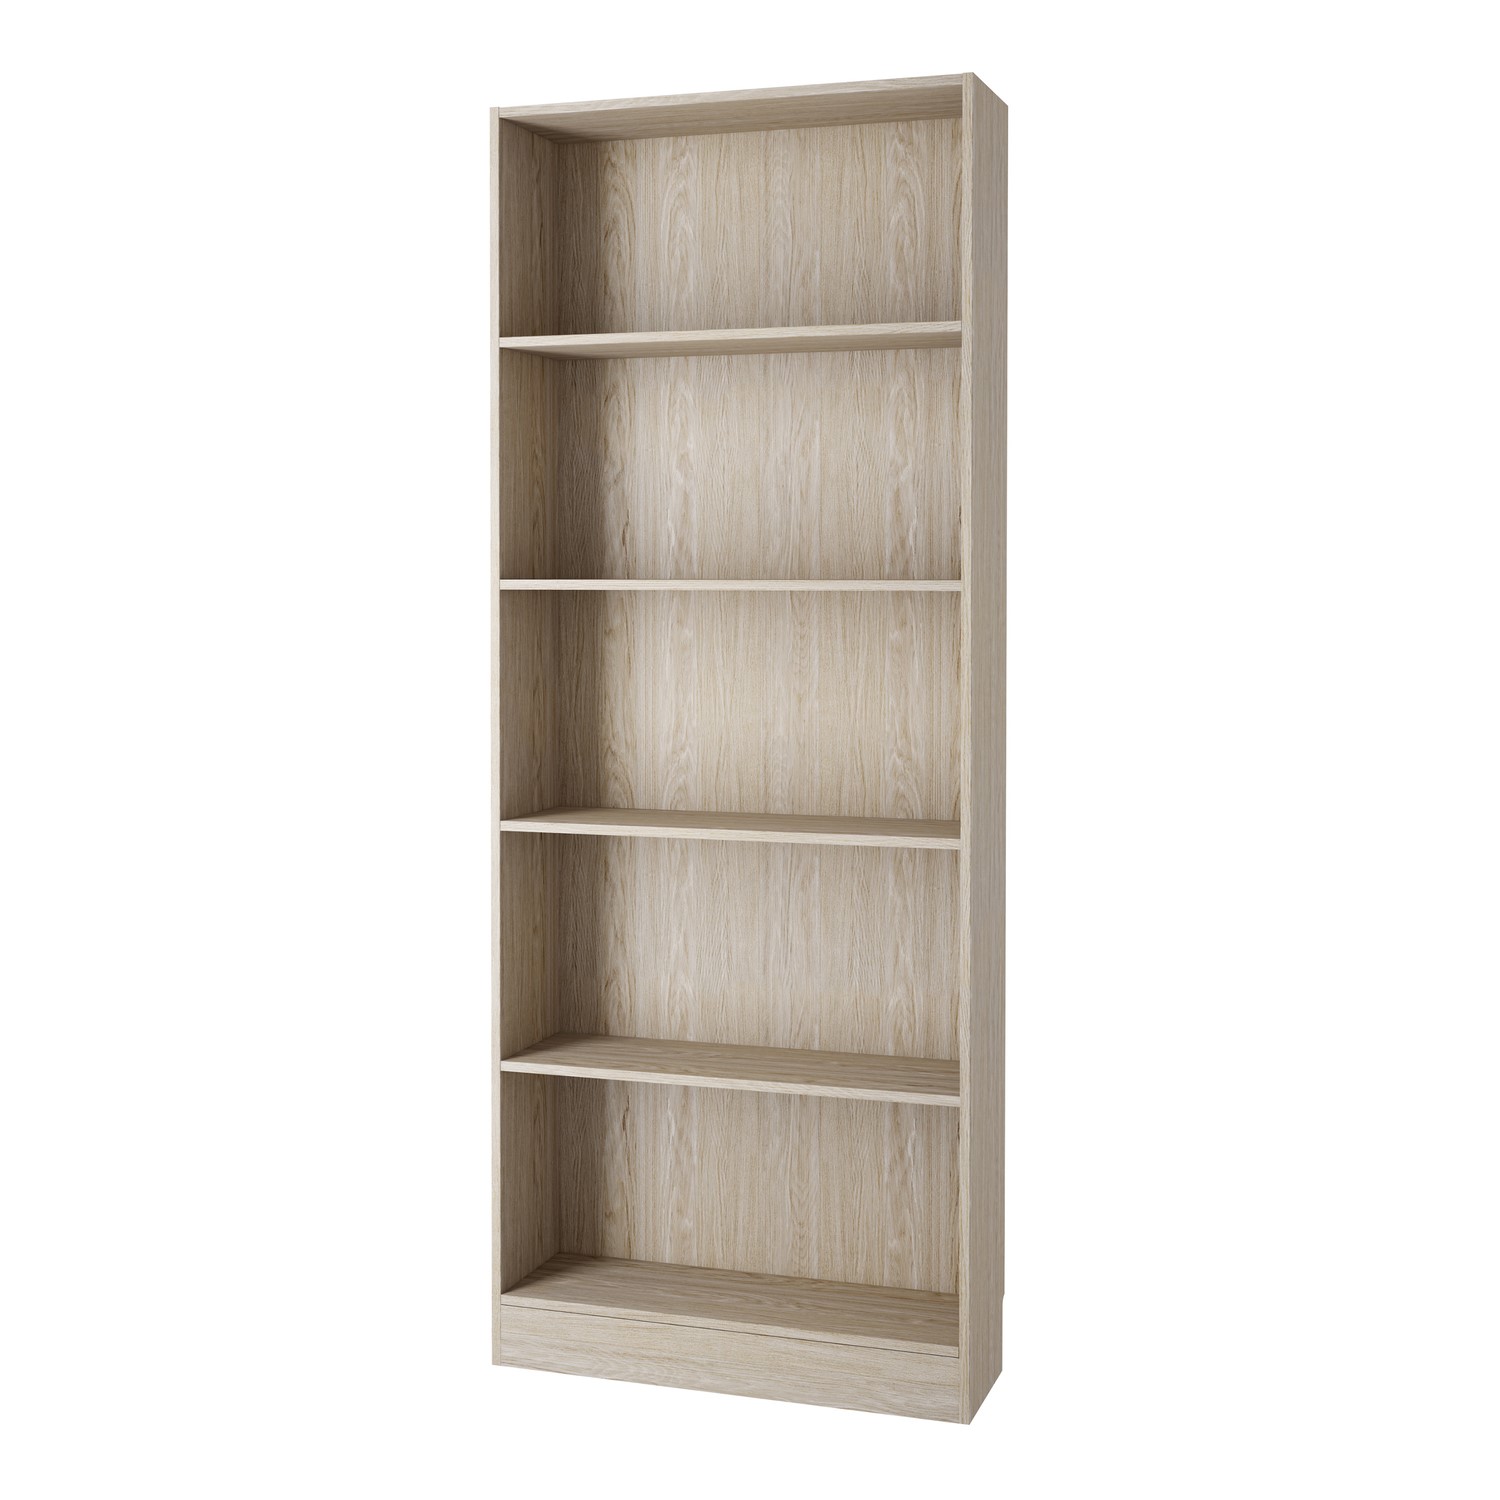 Read more about Tall and wide oak bookcase basic